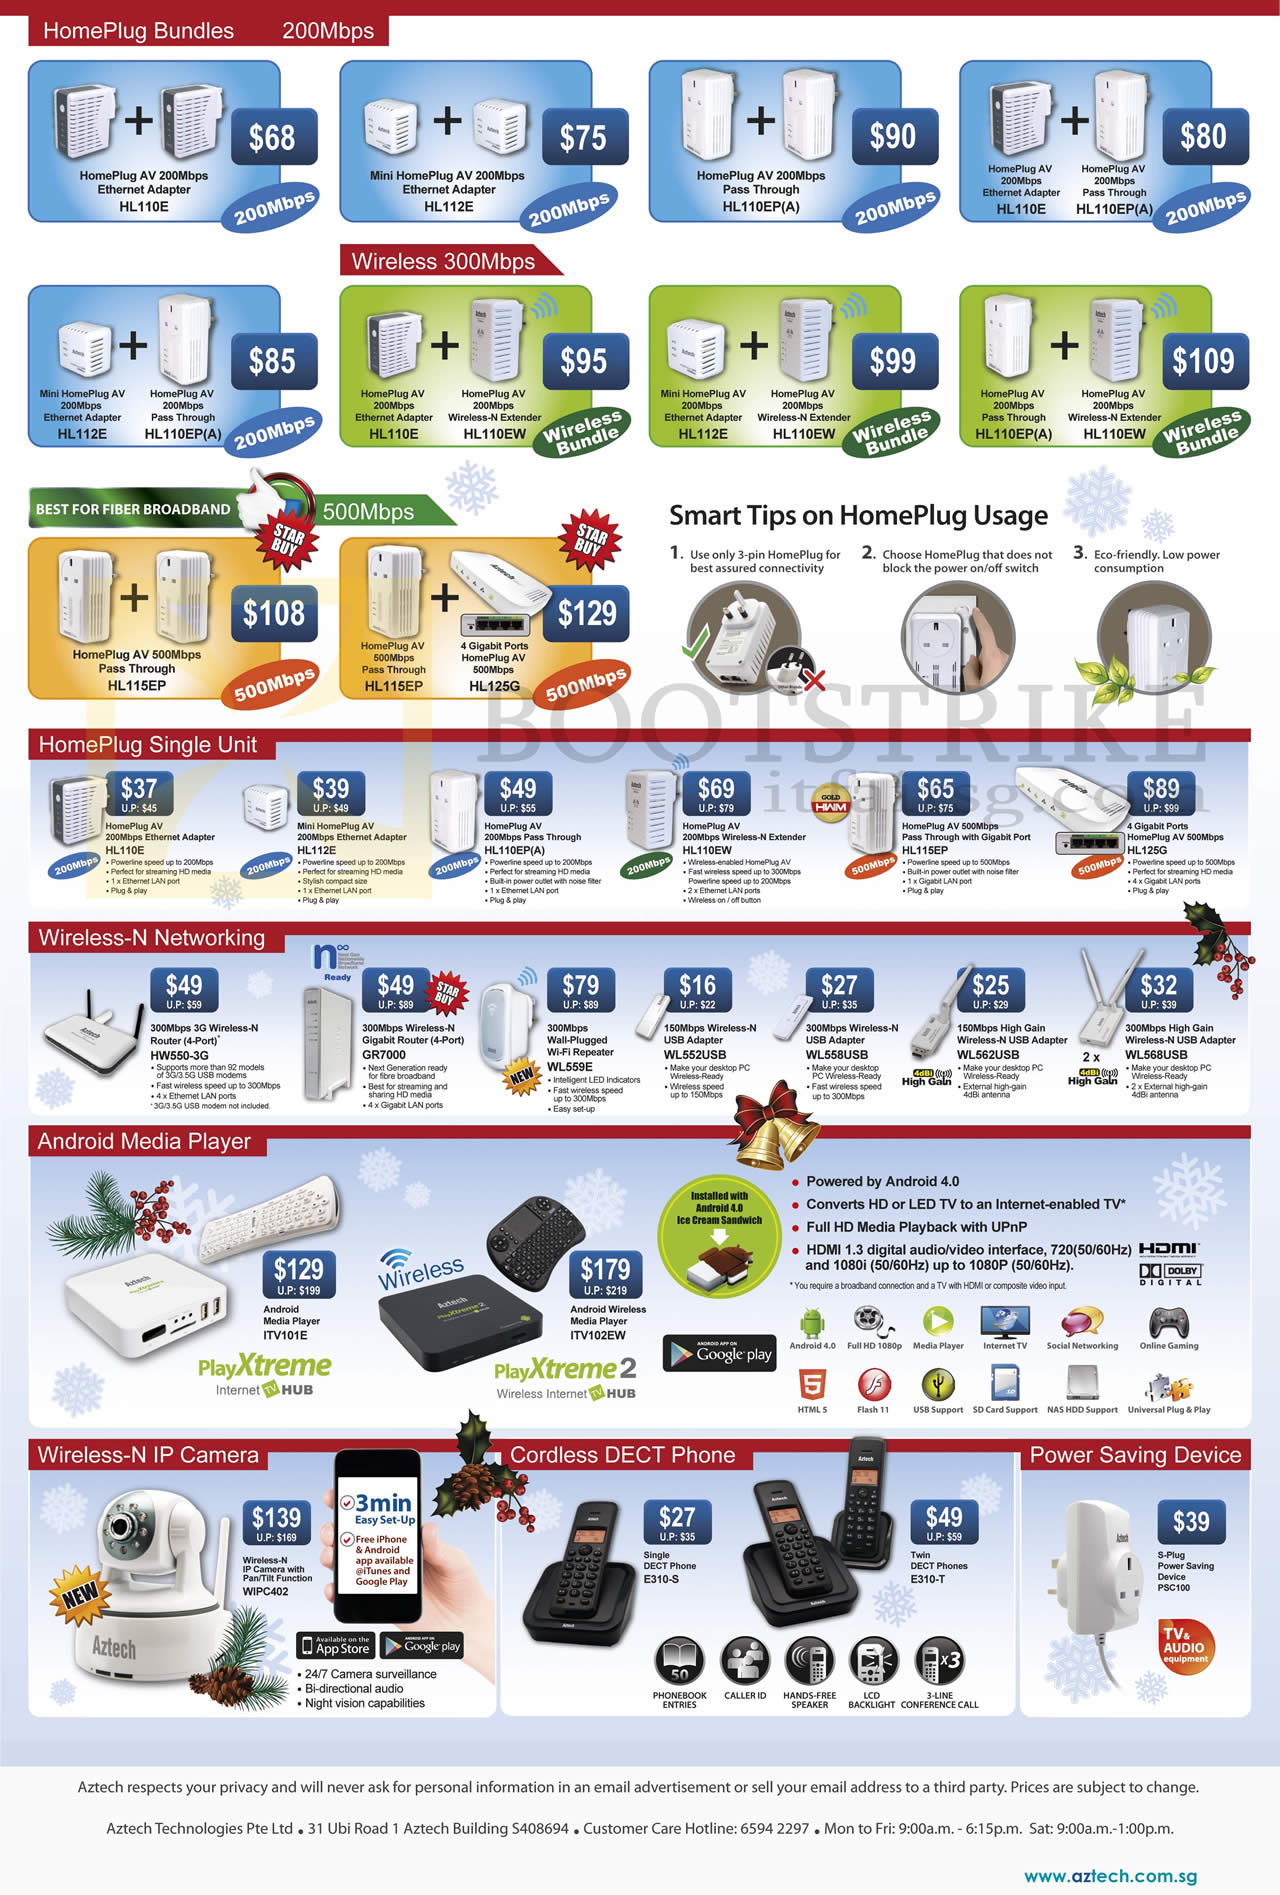 SITEX 2012 price list image brochure of Aztech Networking HomePlug Bundles, Wireless Router, USB Adapter, Android Media Player PlayXtreme 2, IPCam WIPC402, Dect Phone